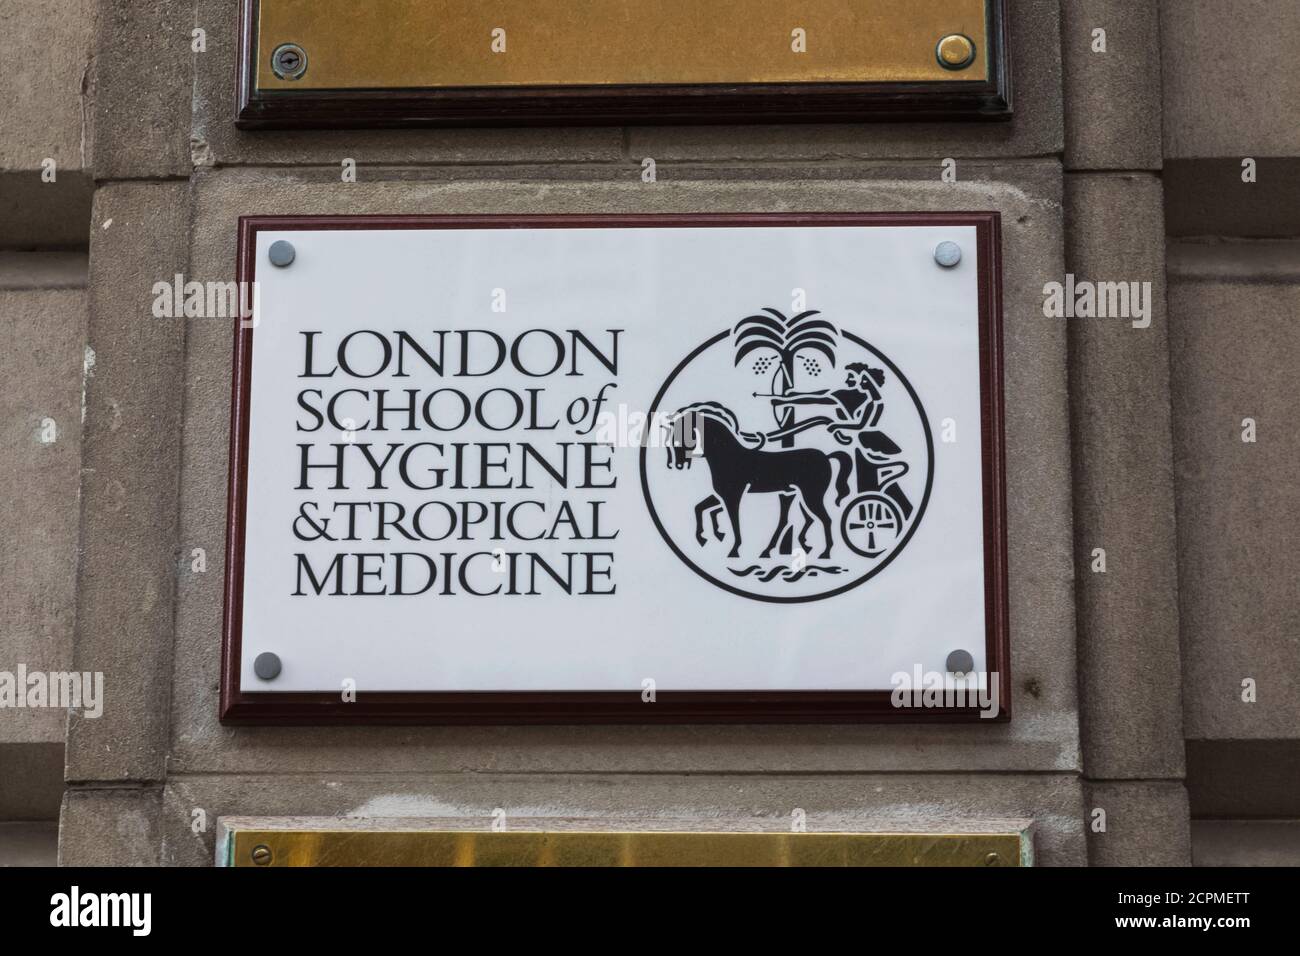 England, London, Westminster, Bloomsbury, London School of Hygiene and Tropical Medicine, Wall Plate Stock Photo